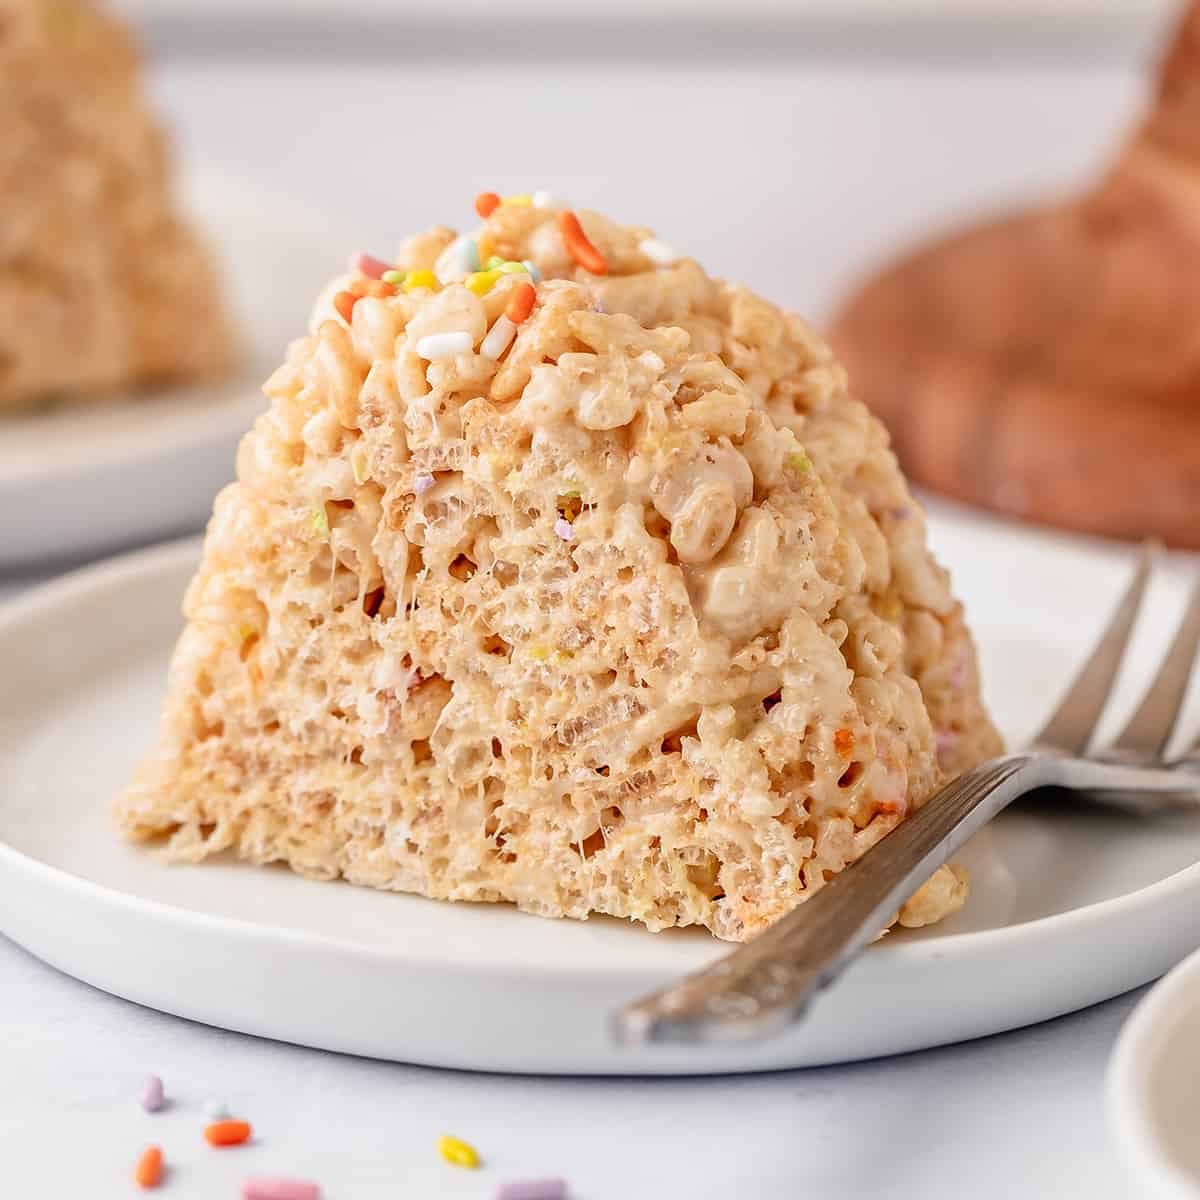 a piece of Rice Crispy Cake on a plate with a fork